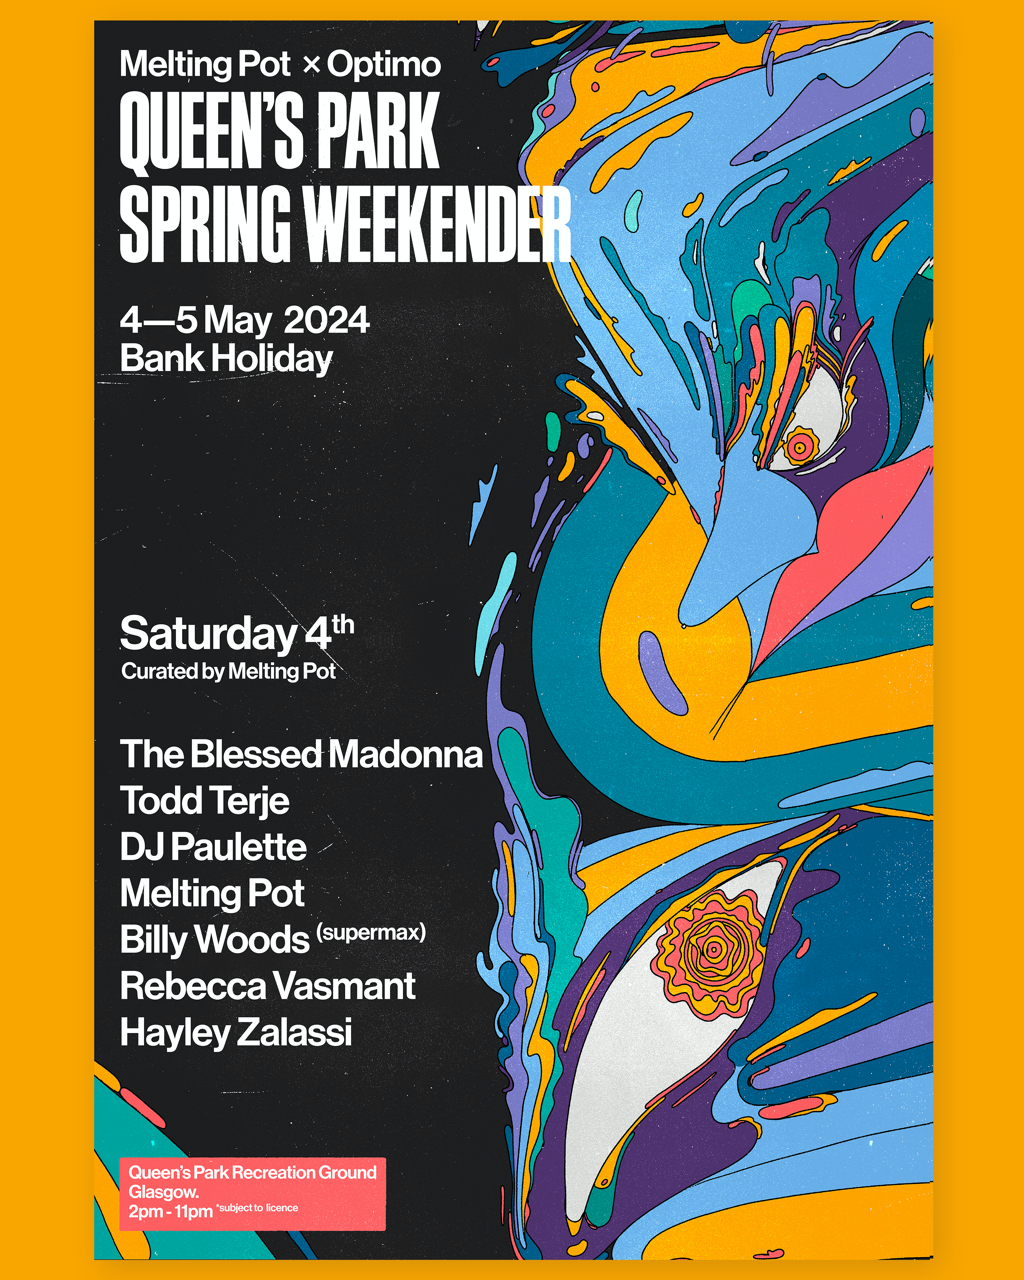 Queen's Park Spring Weekender '24 by Melting Pot & Optimo // Sat 4th & Sun 5th of May - フライヤー裏